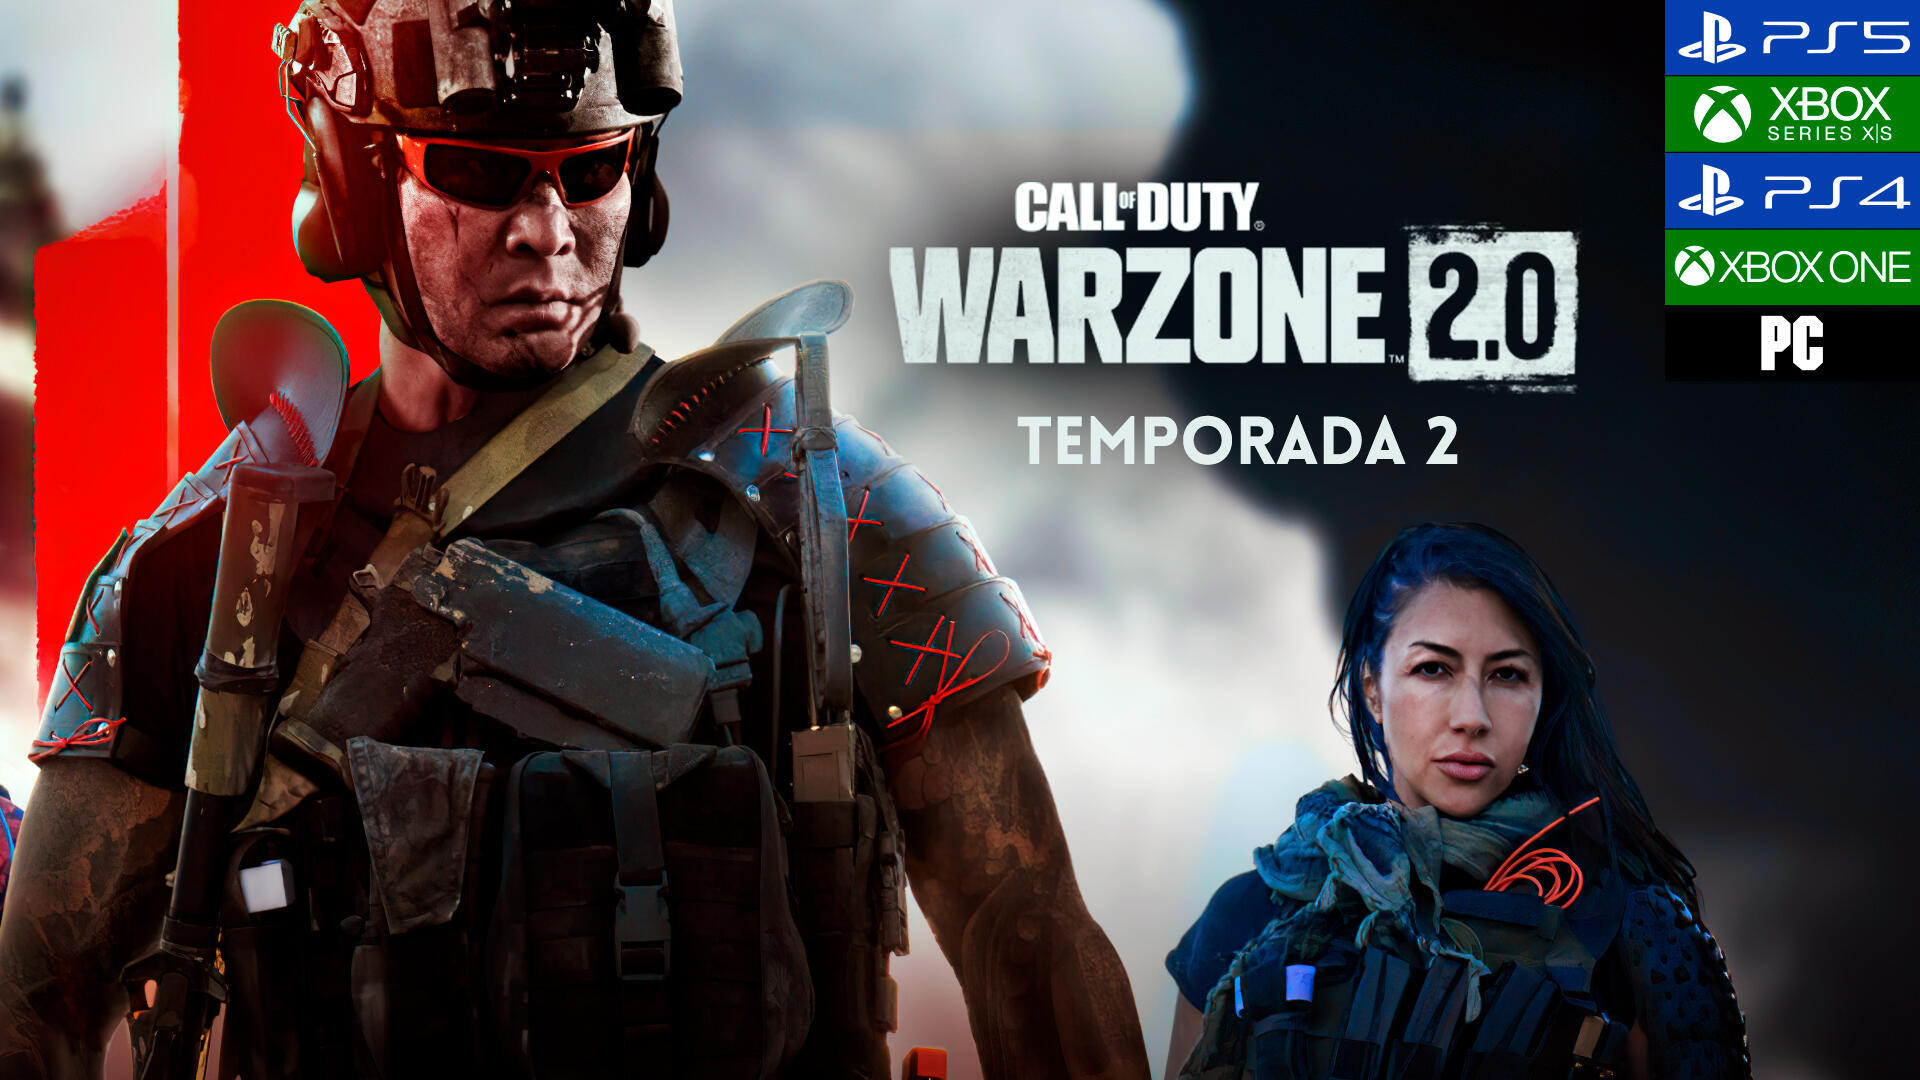 Call of Duty: Warzone 2.0 - Videojuego (PS5, PC, Xbox Series X/S